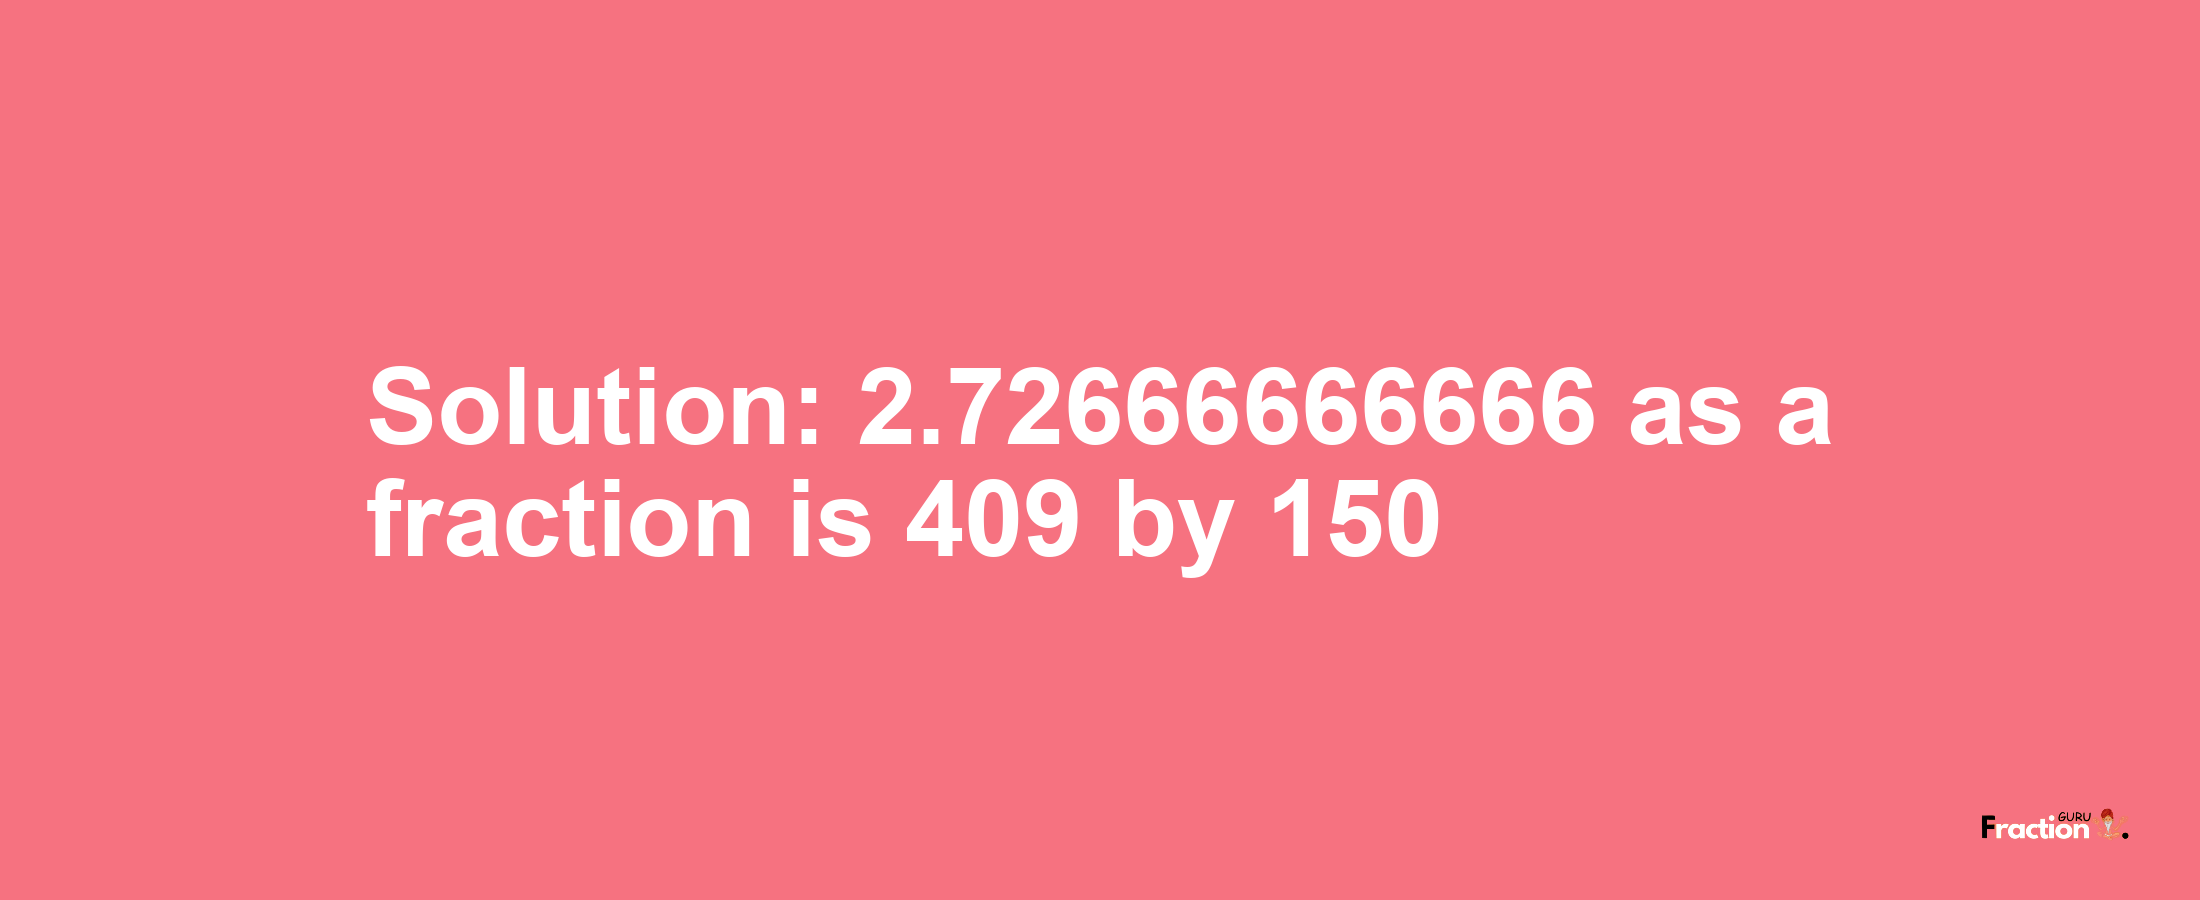 Solution:2.72666666666 as a fraction is 409/150